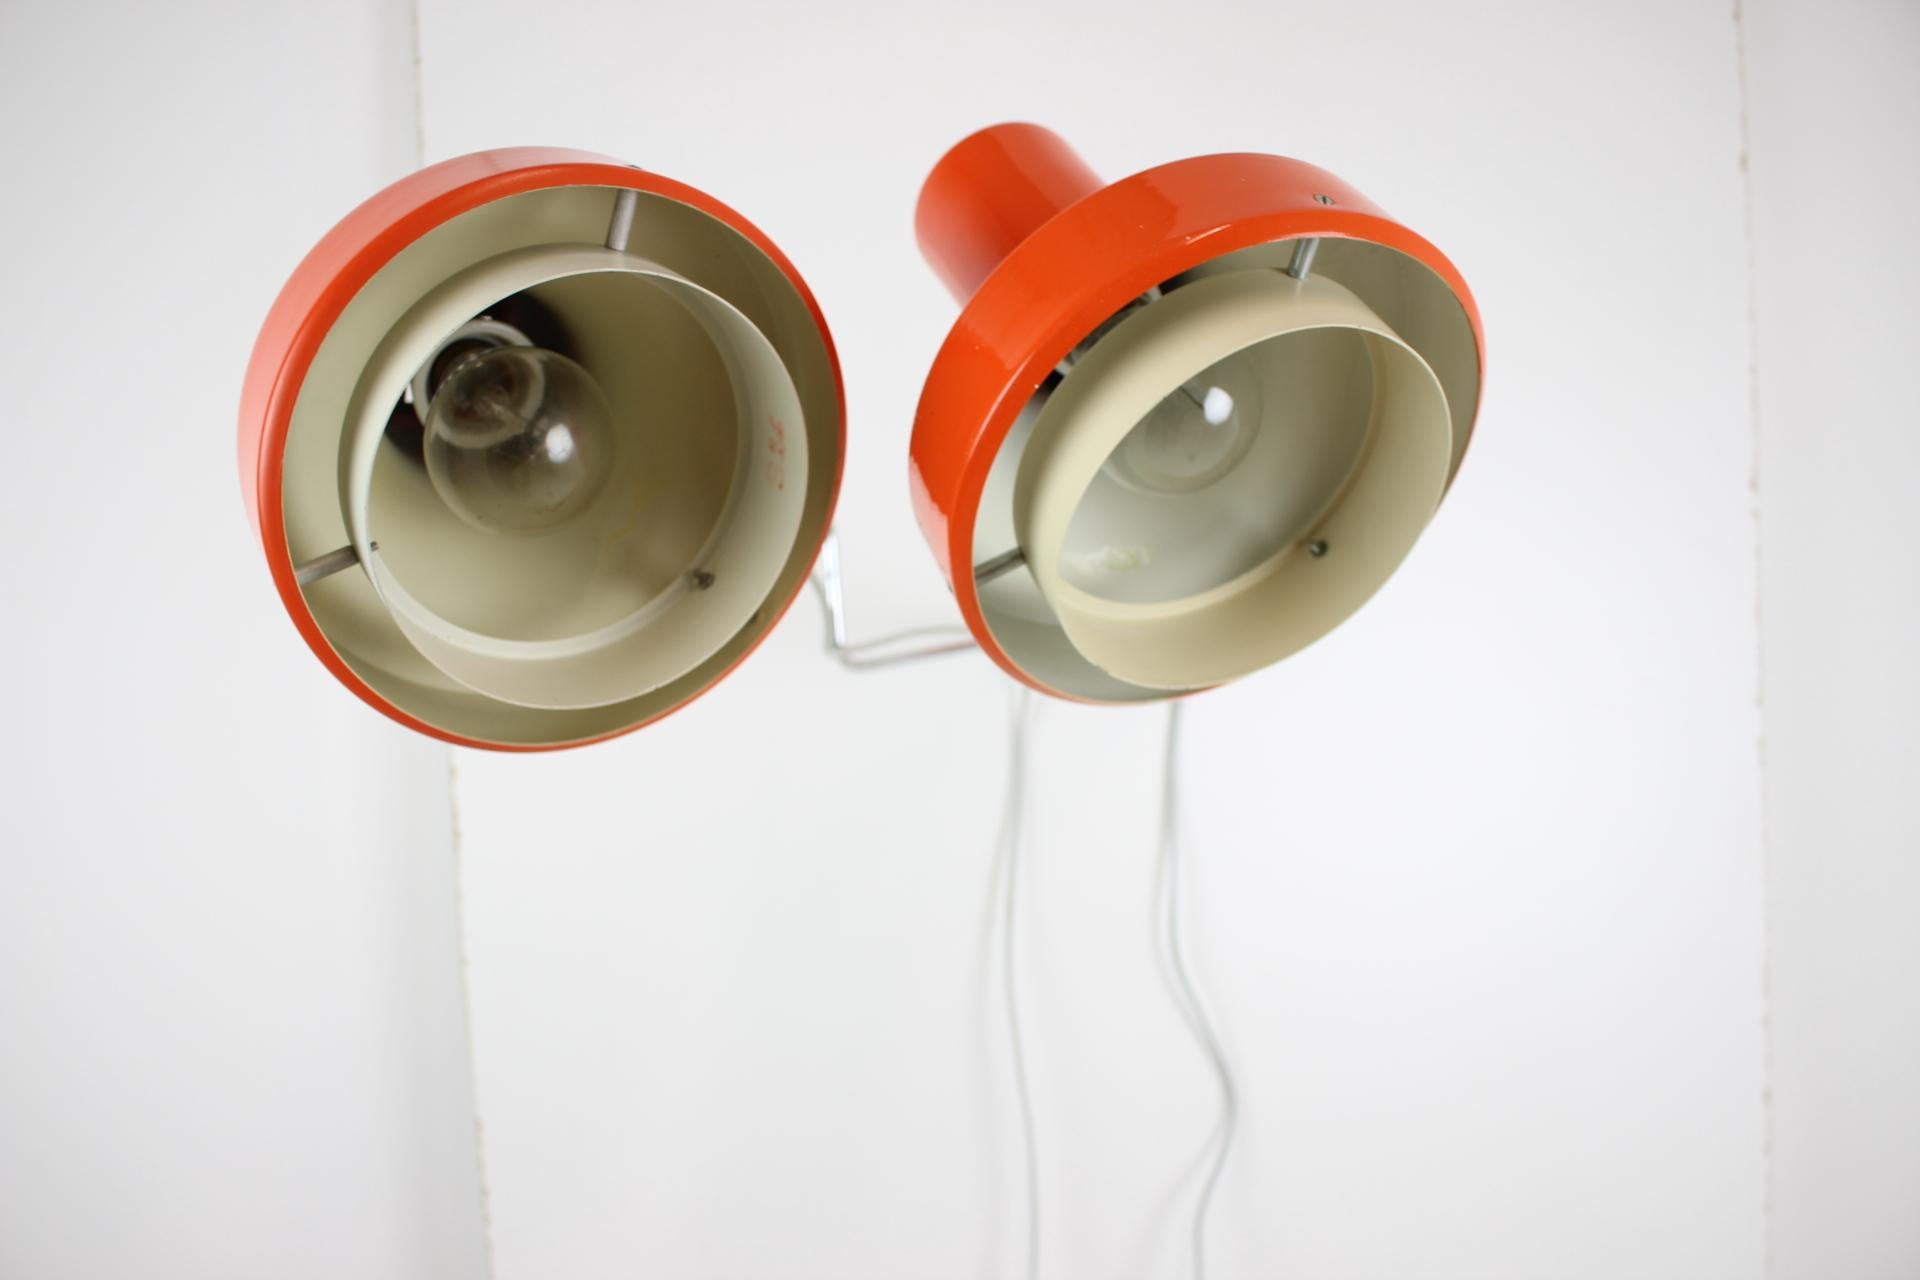 Metal Mid-Century Wall Lamps Designed by Josef Hurka for Napako, 1970's For Sale